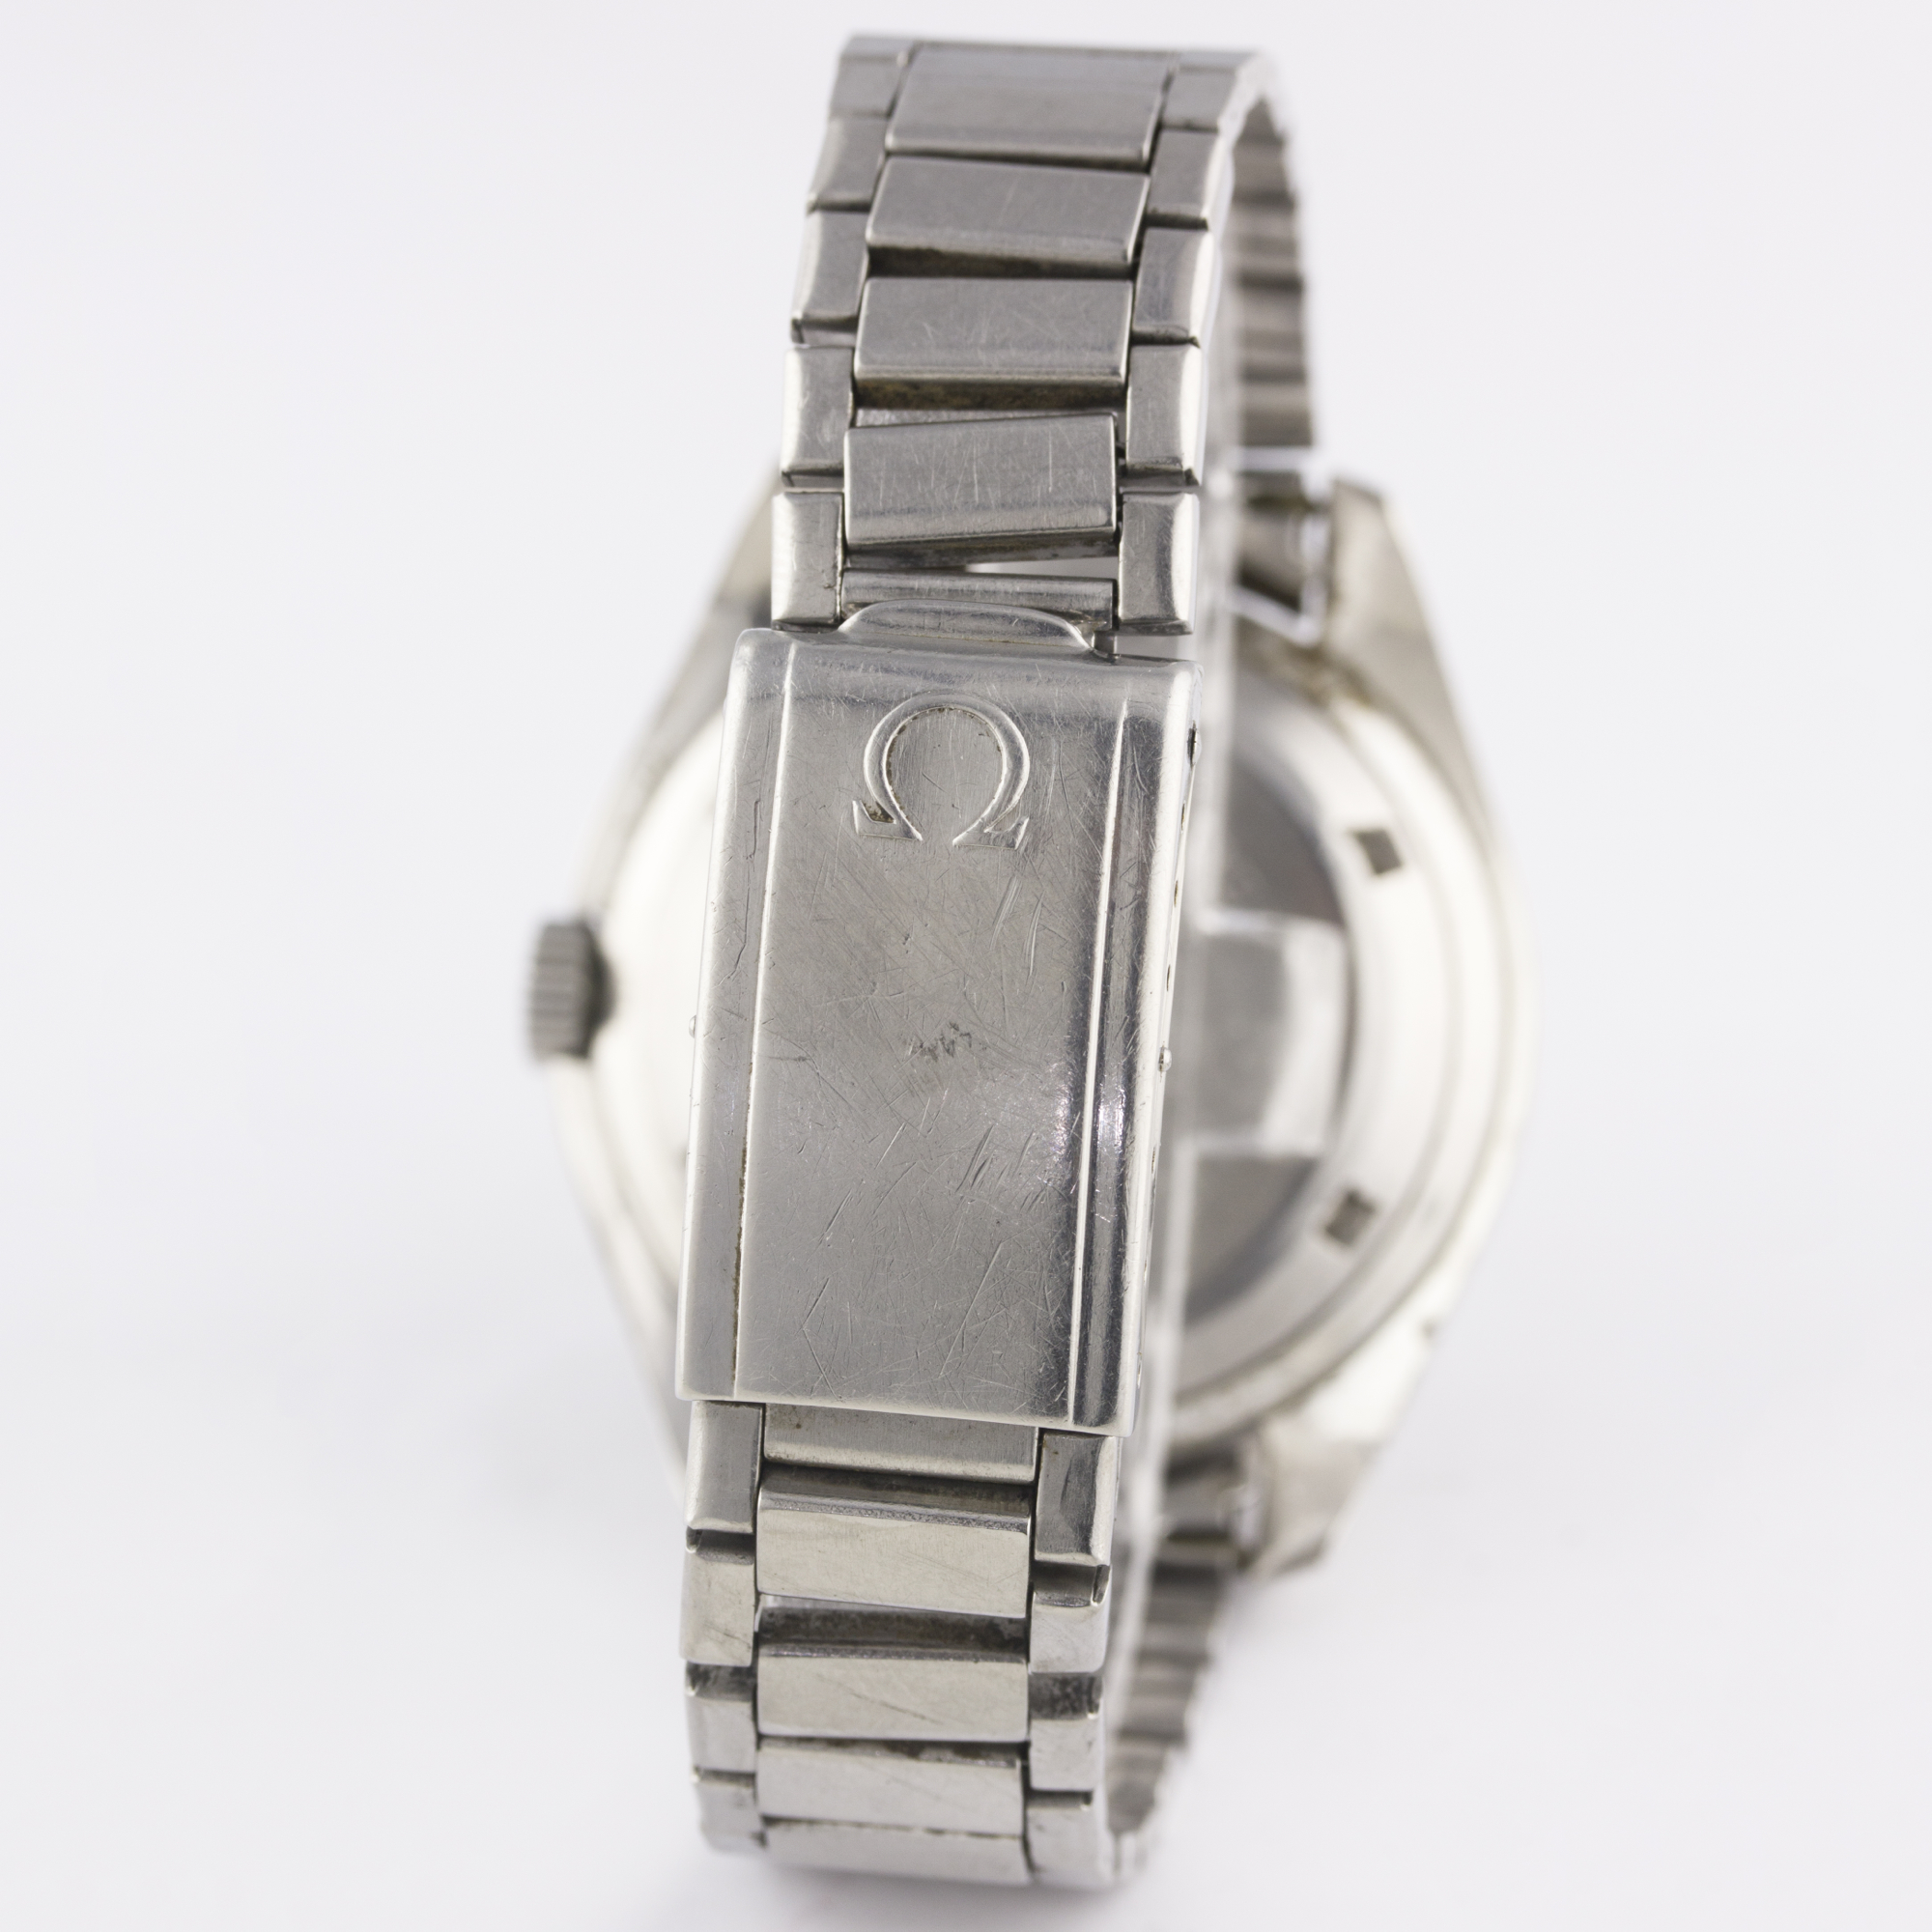 A RARE GENTLEMAN'S STAINLESS STEEL OMEGA SEAMASTER 300 BRACELET WATCH CIRCA 1967, REF. 165024 - Image 7 of 8